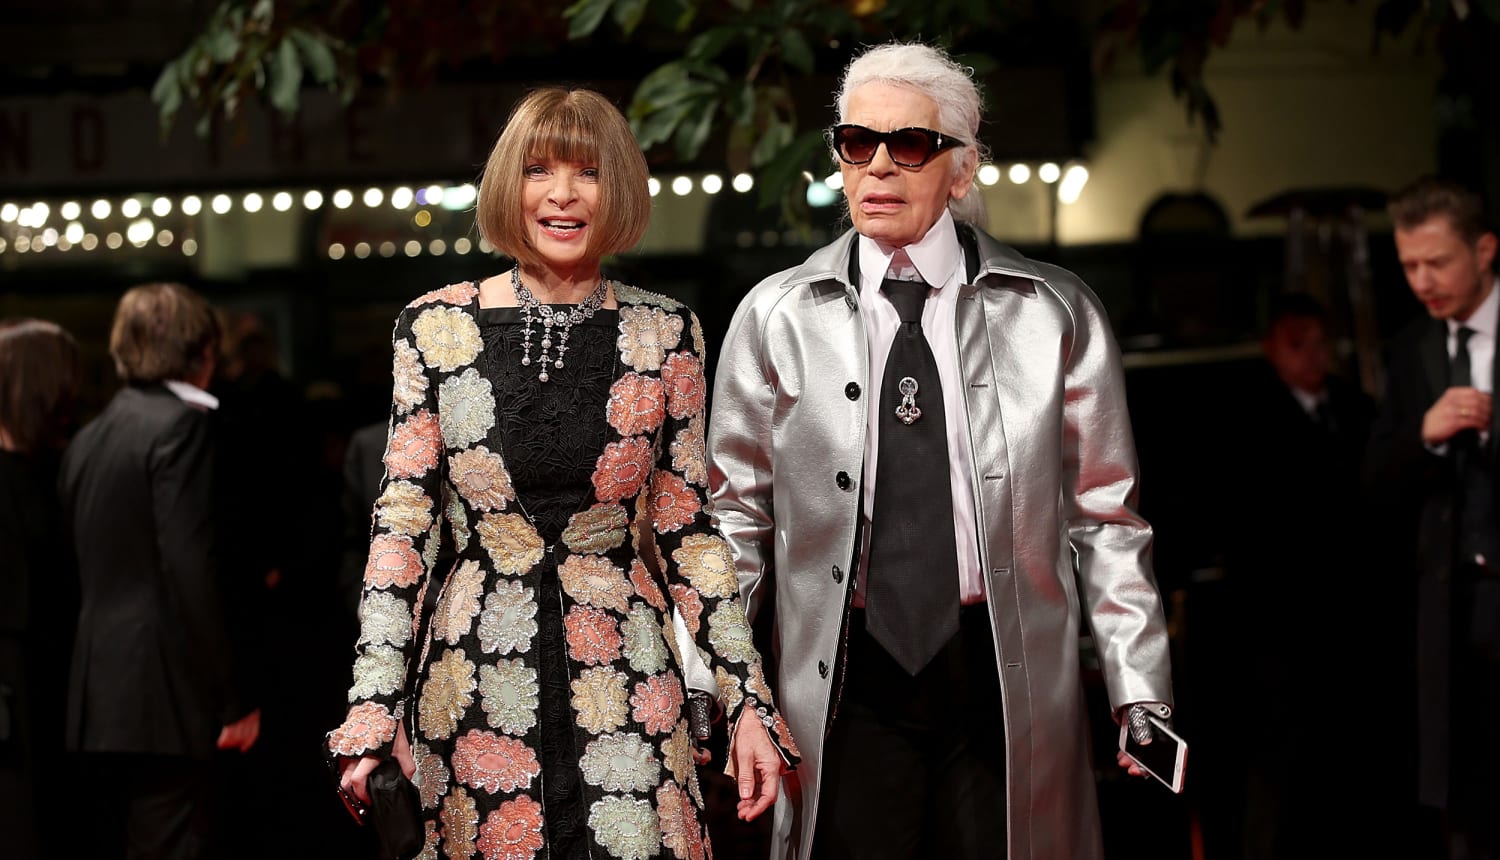 Karl Lagerfeld For Next Met Gala's Theme Is A No For Me, Here's